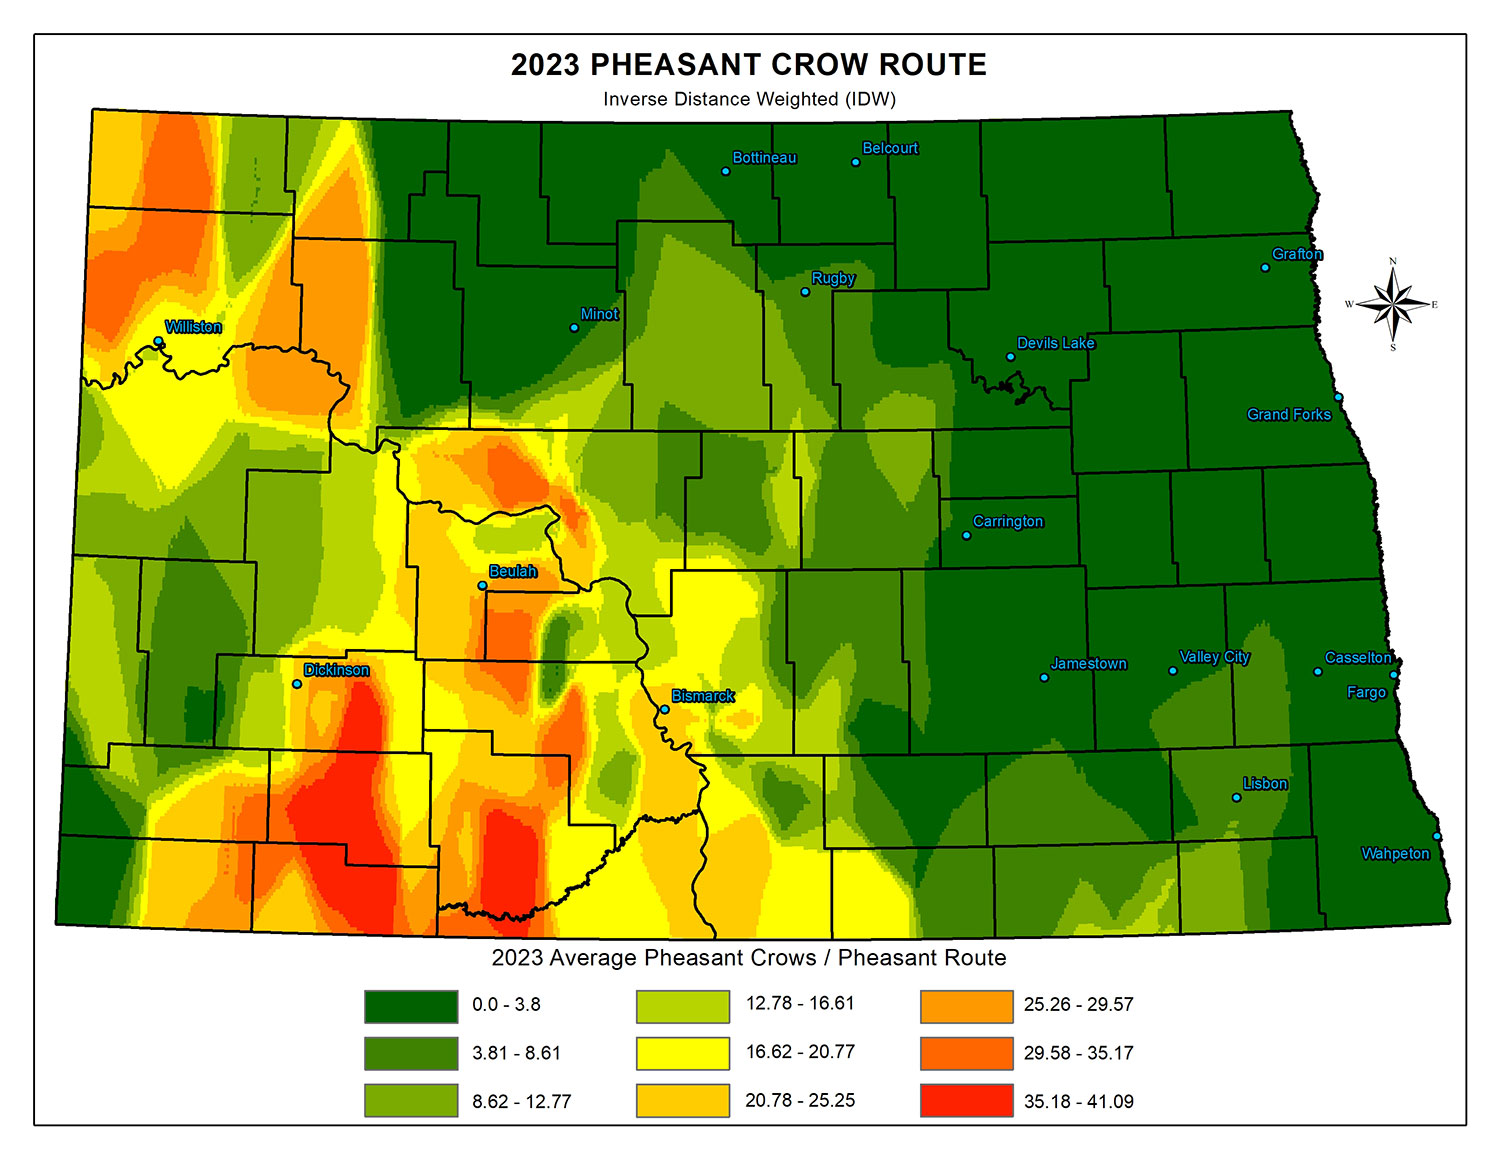 Heat map of crowing counts seen on 2023 survey routes